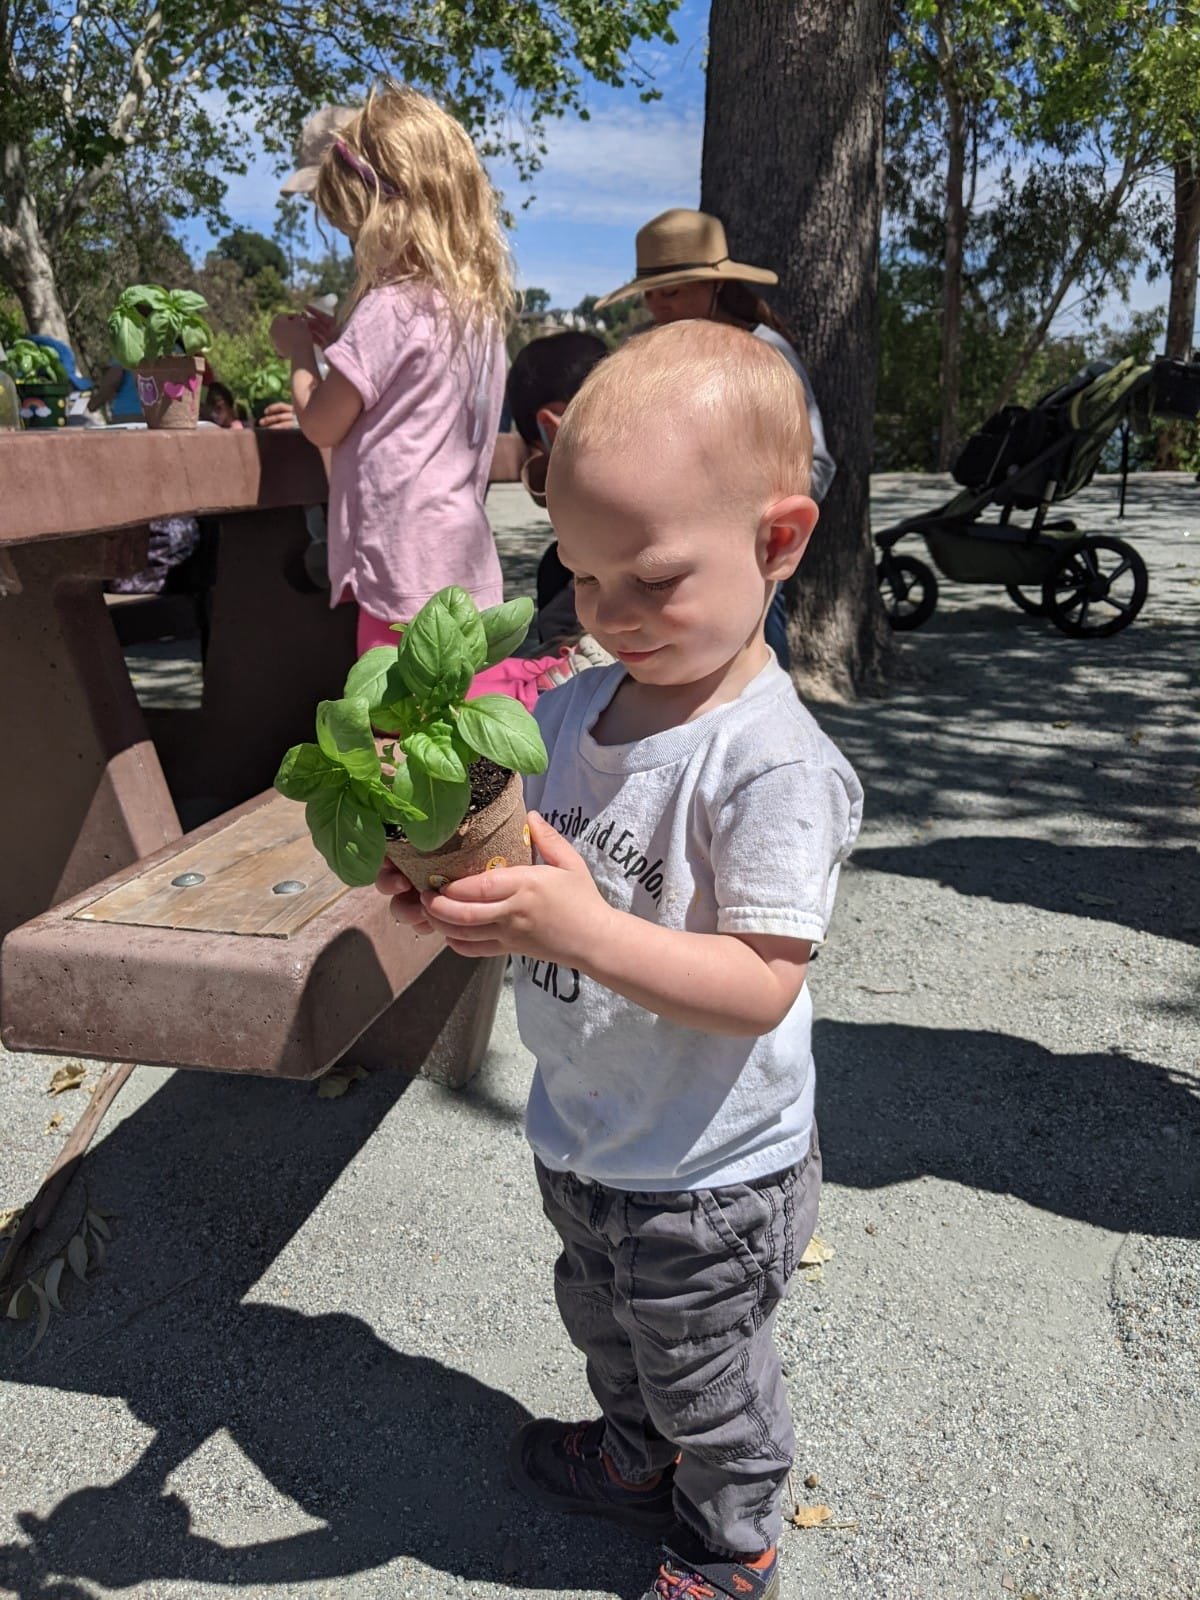 blond boy with crafted plant.jpeg